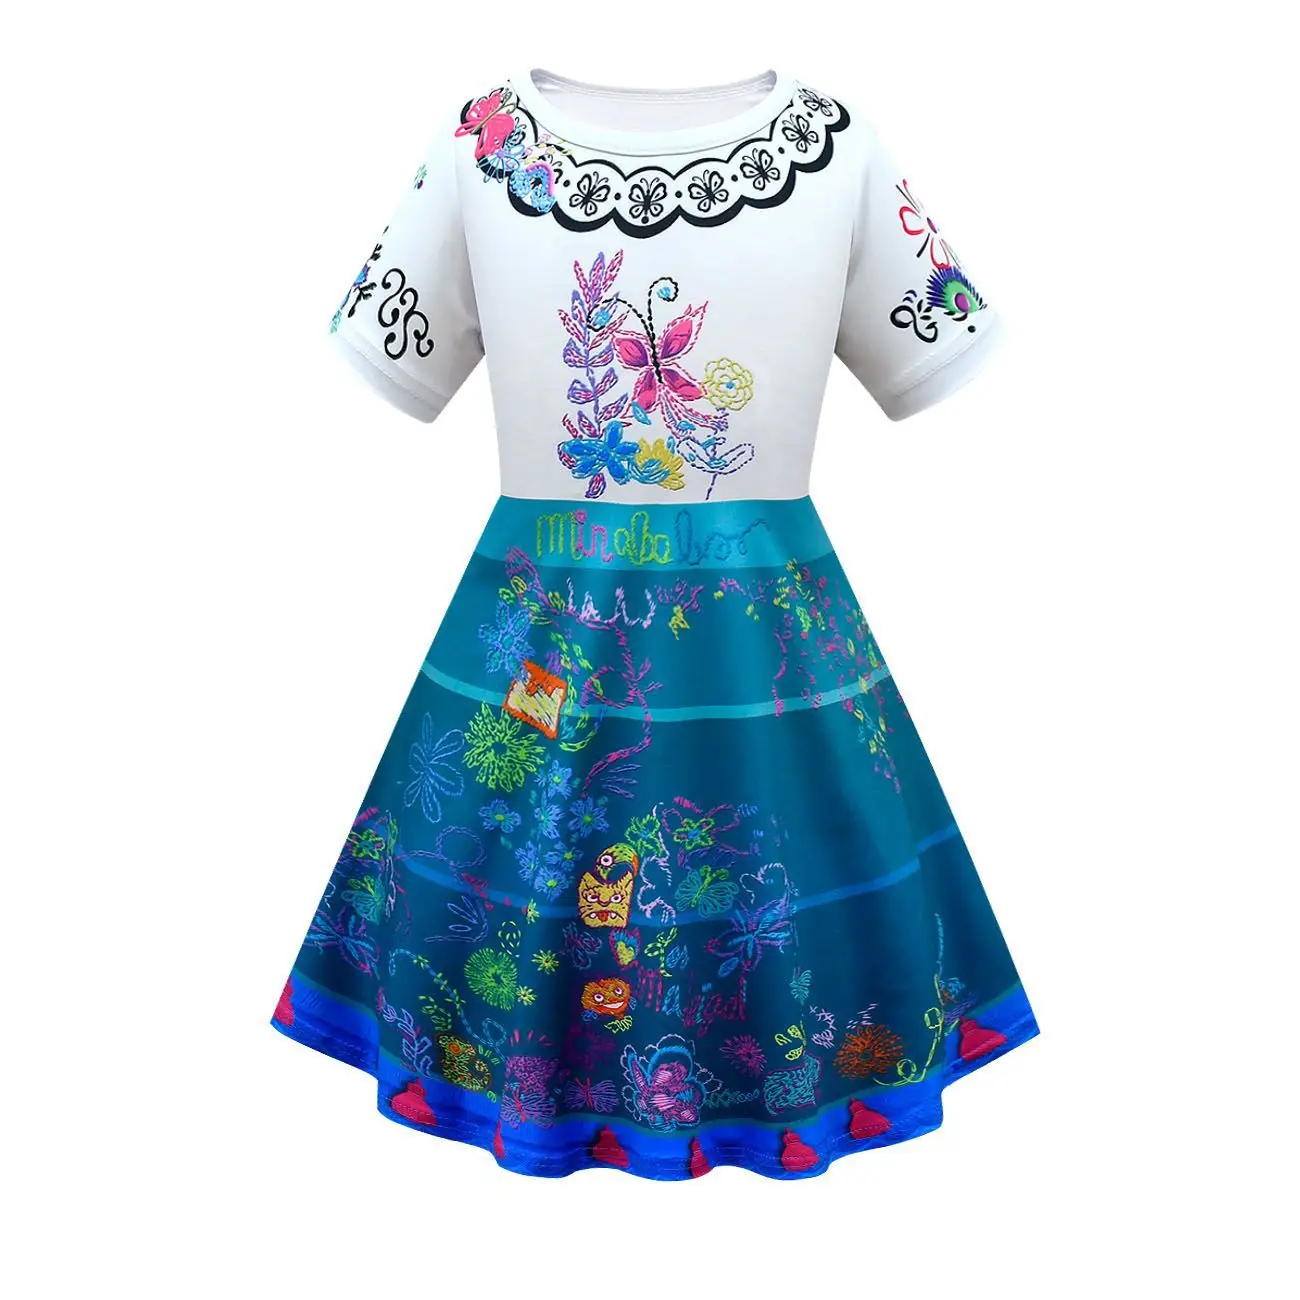 New Encanto Dress Mirabel Cosplay Princess Dresses Baby Girls Short Sleeve Cartoon Clothing Children Party Birthday Outfits baby girl skirt apparel